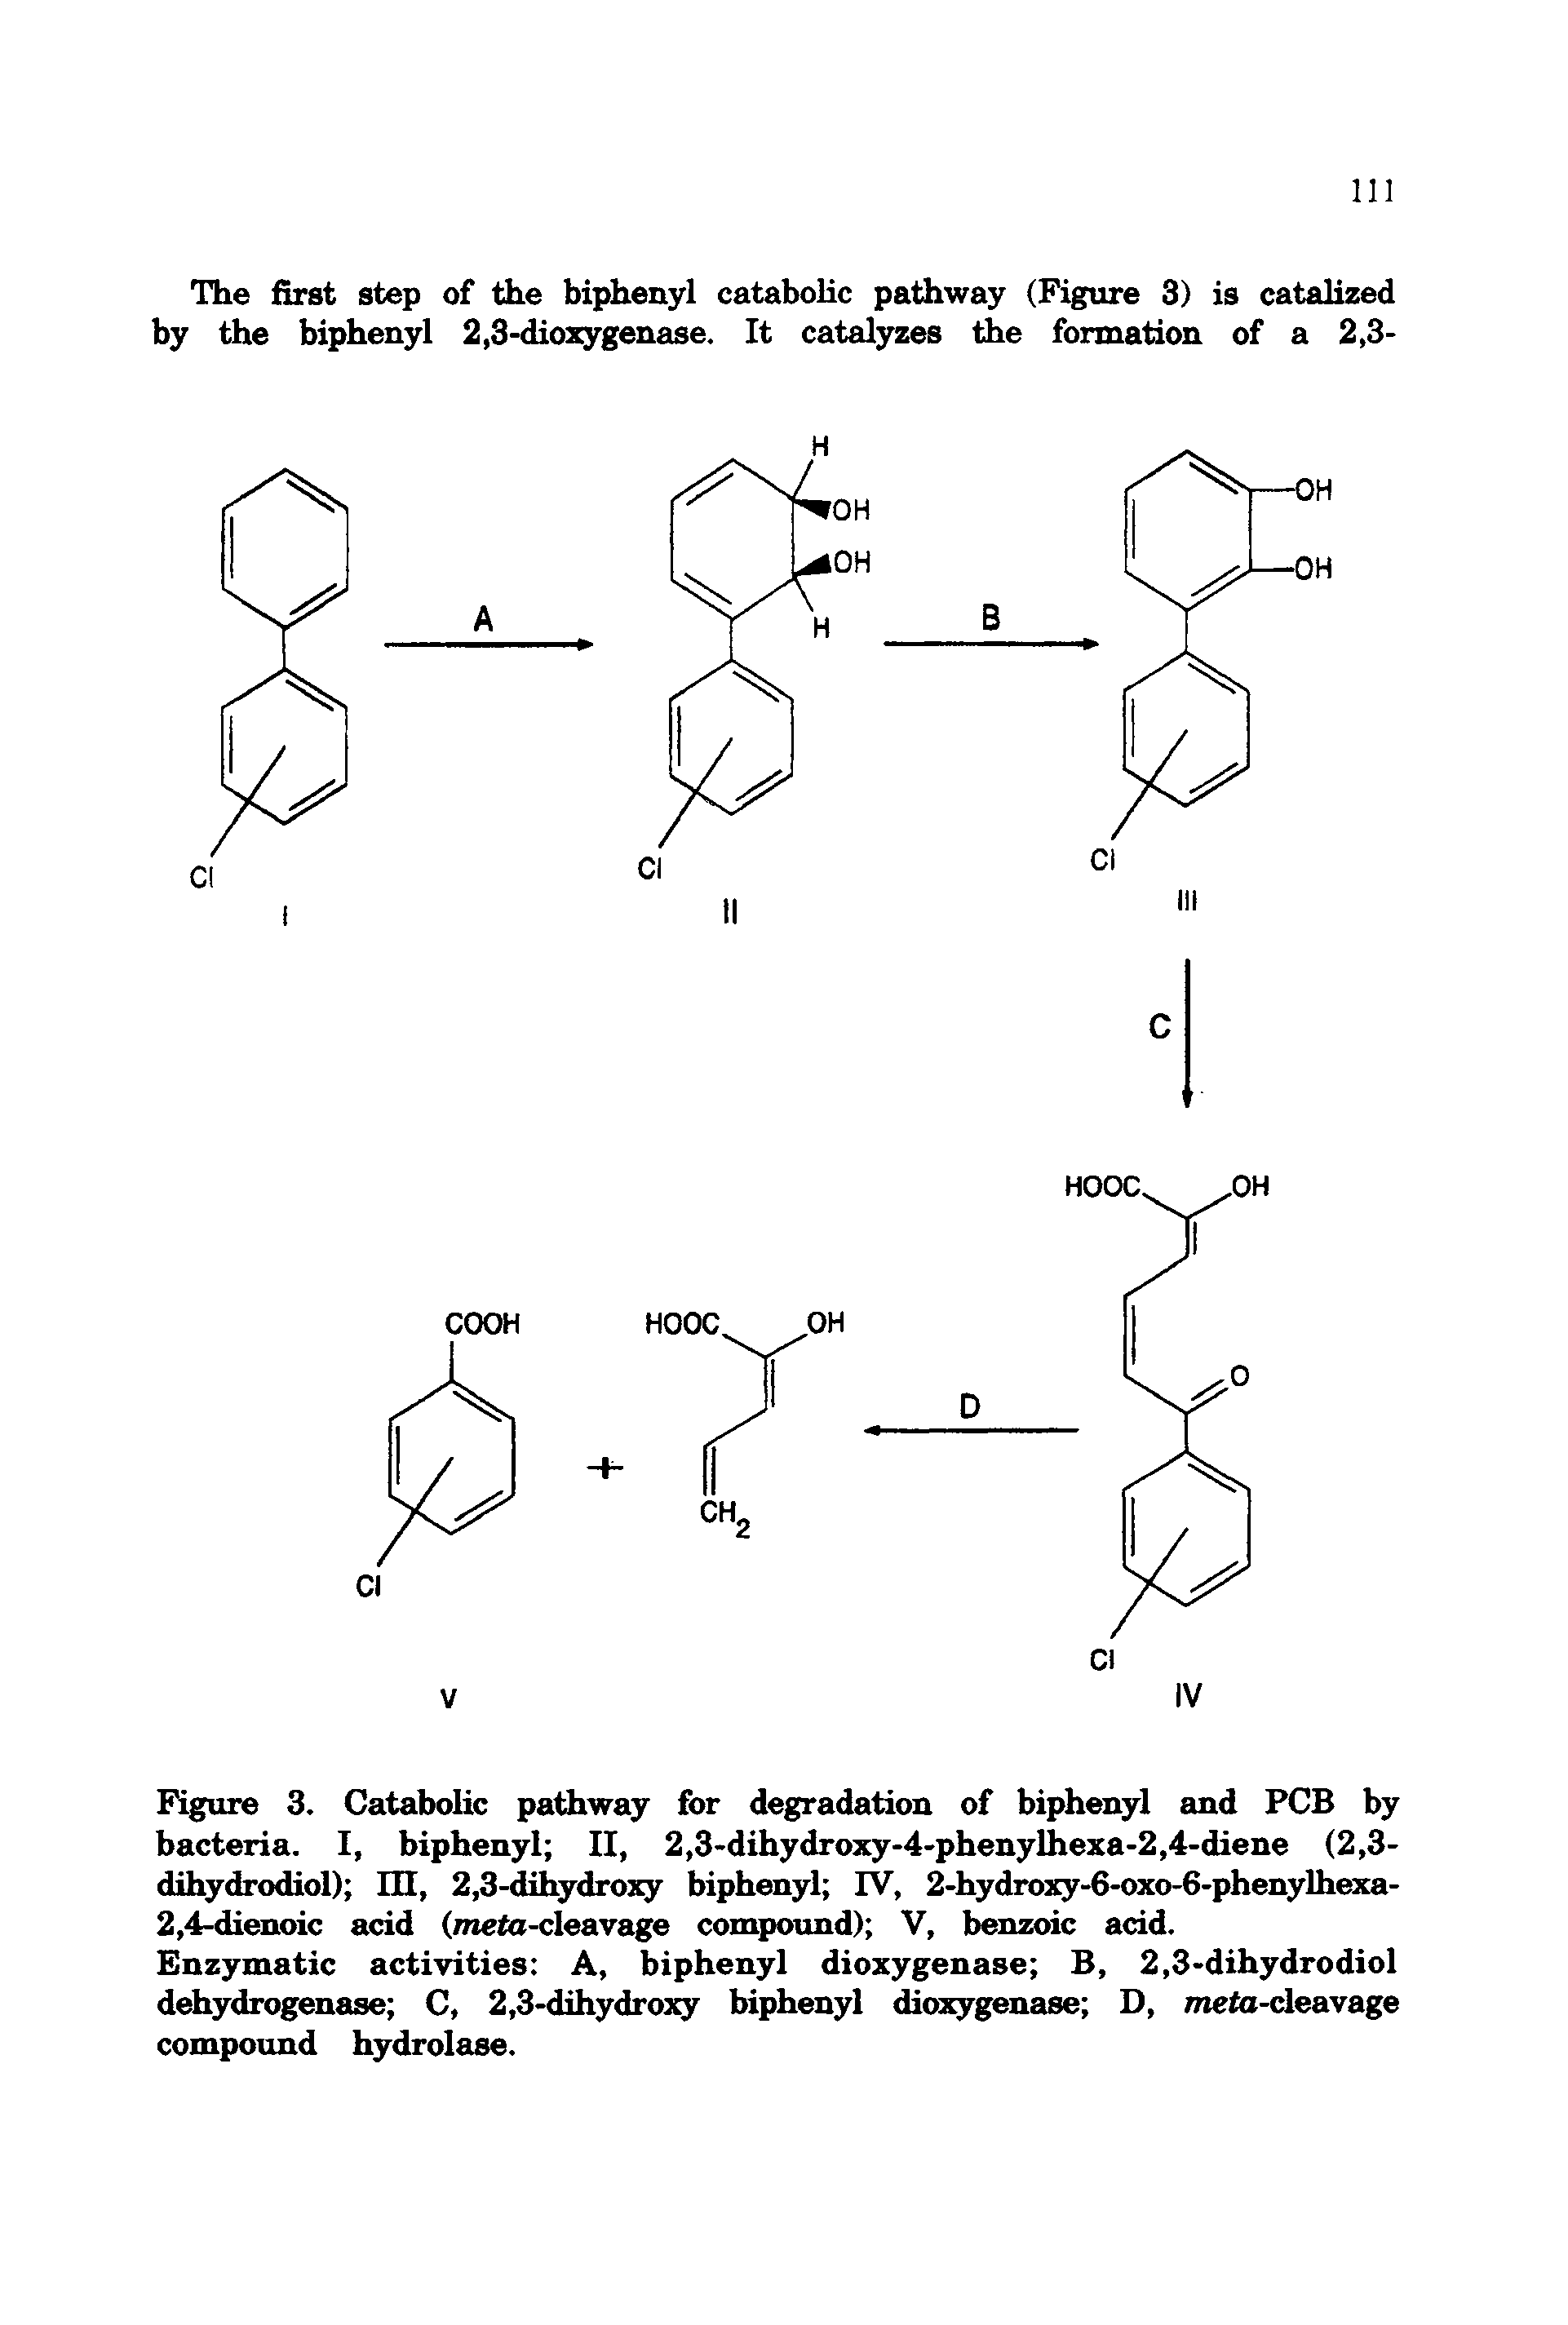 Figure 3. Catabolic pathway for degradation of biphenyl and PCB by bacteria. I, biphenyl II, 2,3-dihydroxy-4-phenylhexa-2,4-diene (2,3-dihydrodiol) HI, 2,3-dihydro] biphenyl IV, 2-hydroxy-6-oxo-6-phenylhexa-2,4-dienoic acid (meto-cleavage compound) V, benzoic add.